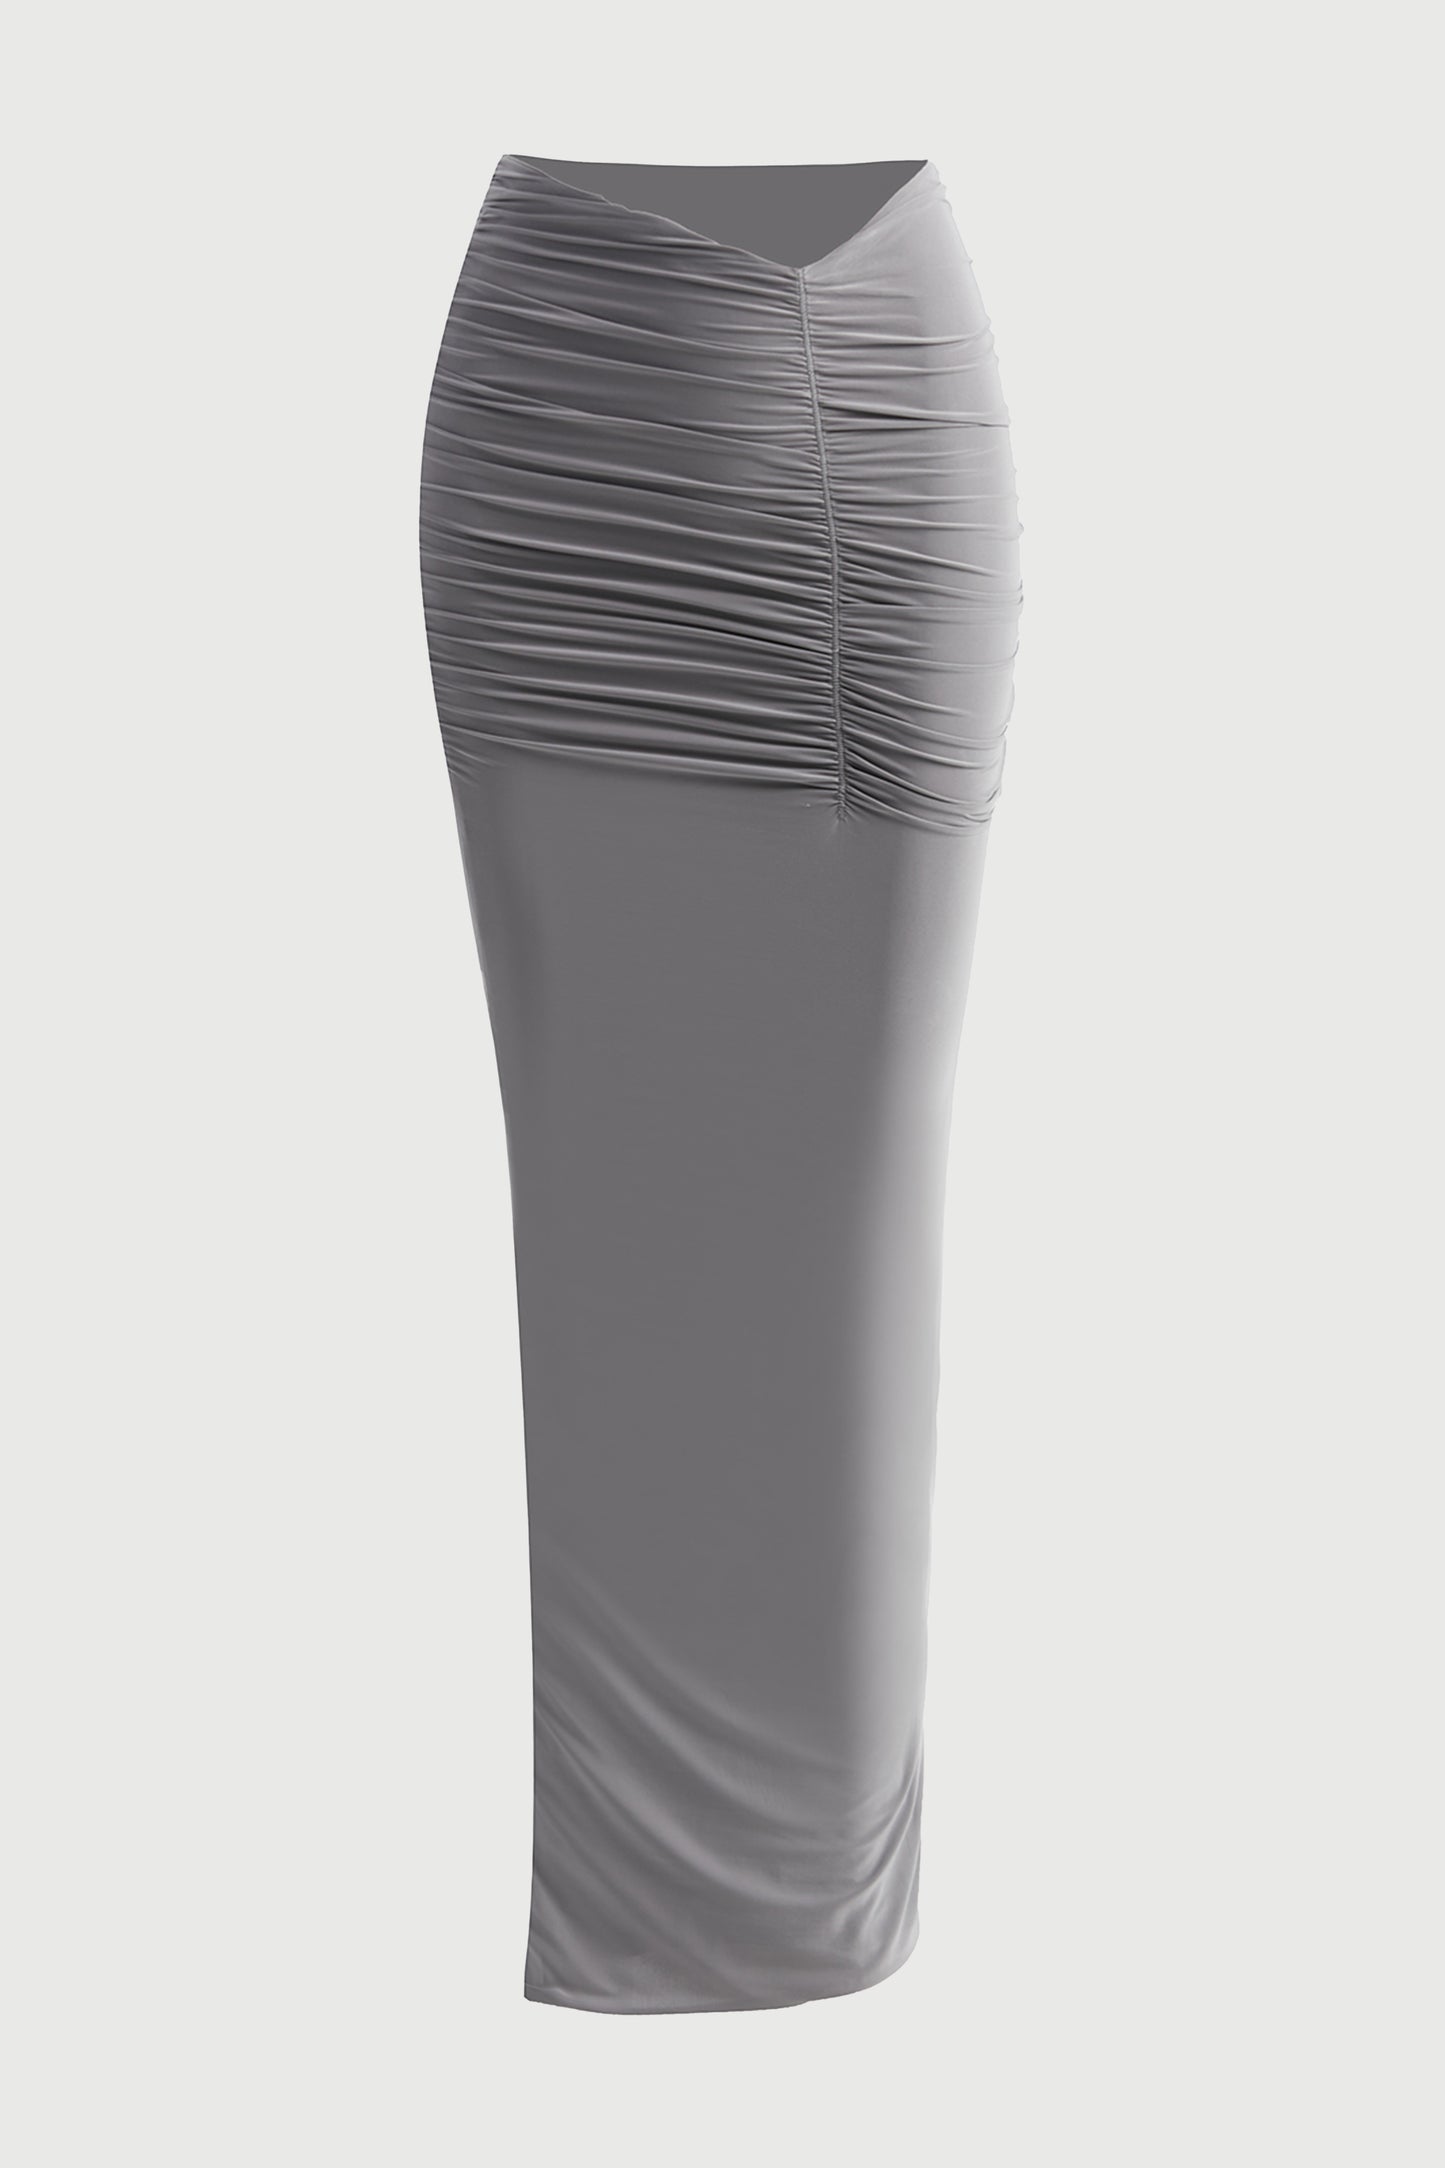 Hourglass Ruched Maxi Skirt